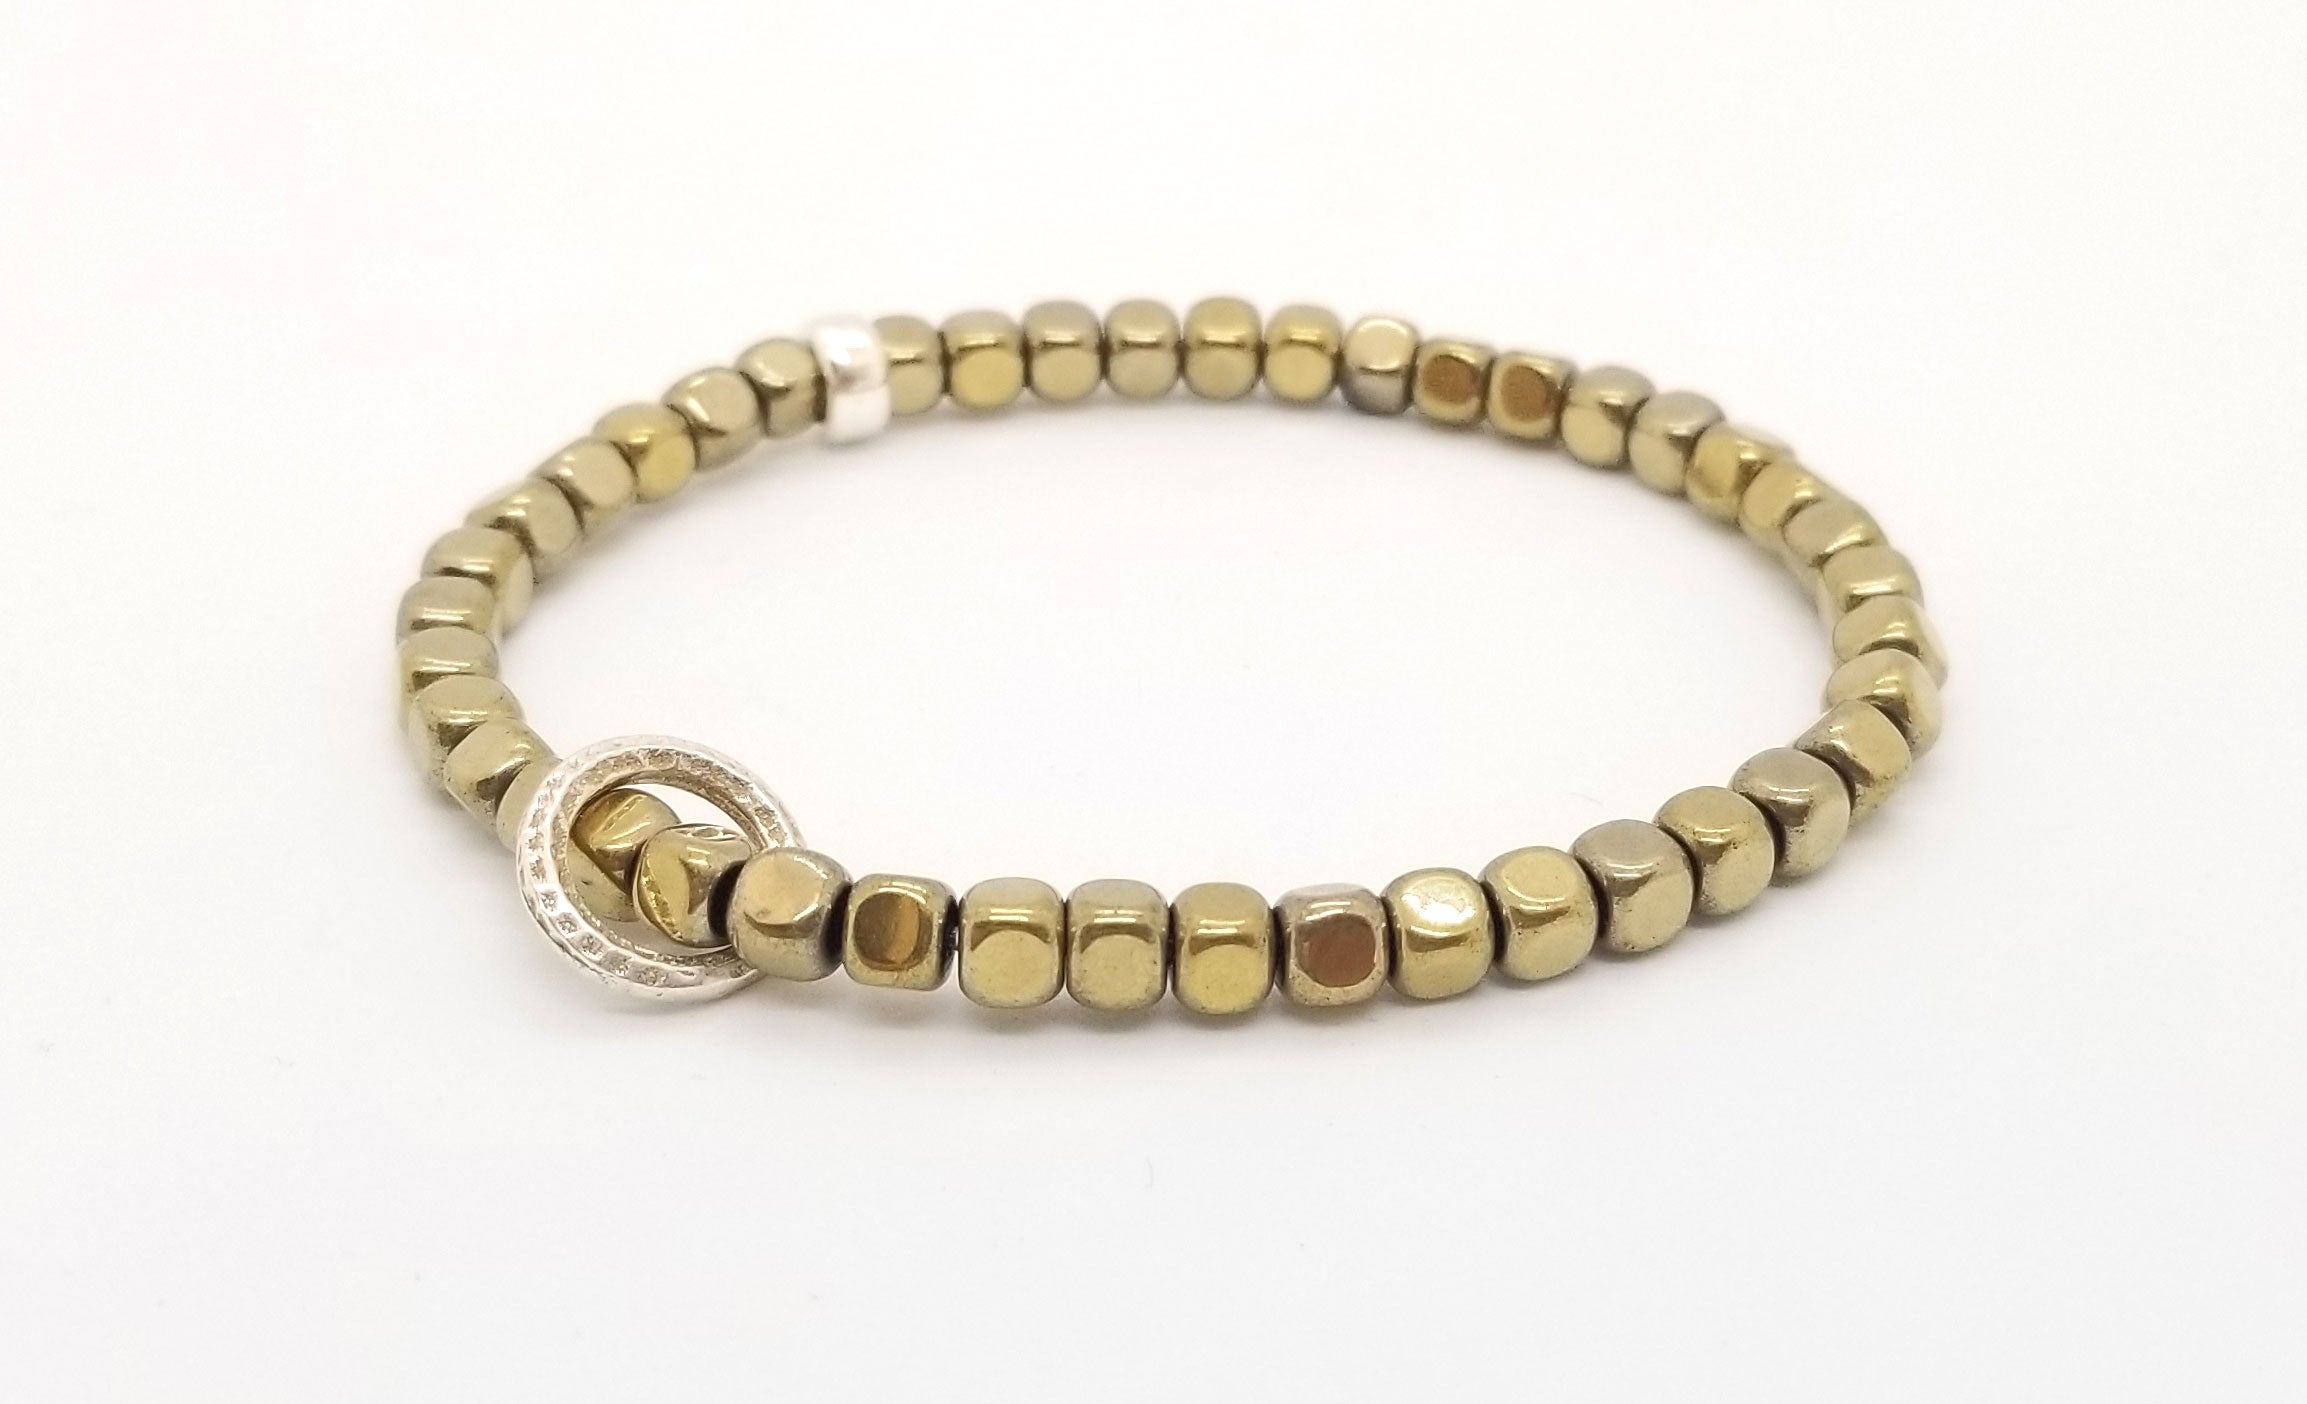 Gold Hematite with Floating Silver Circle Bracelet